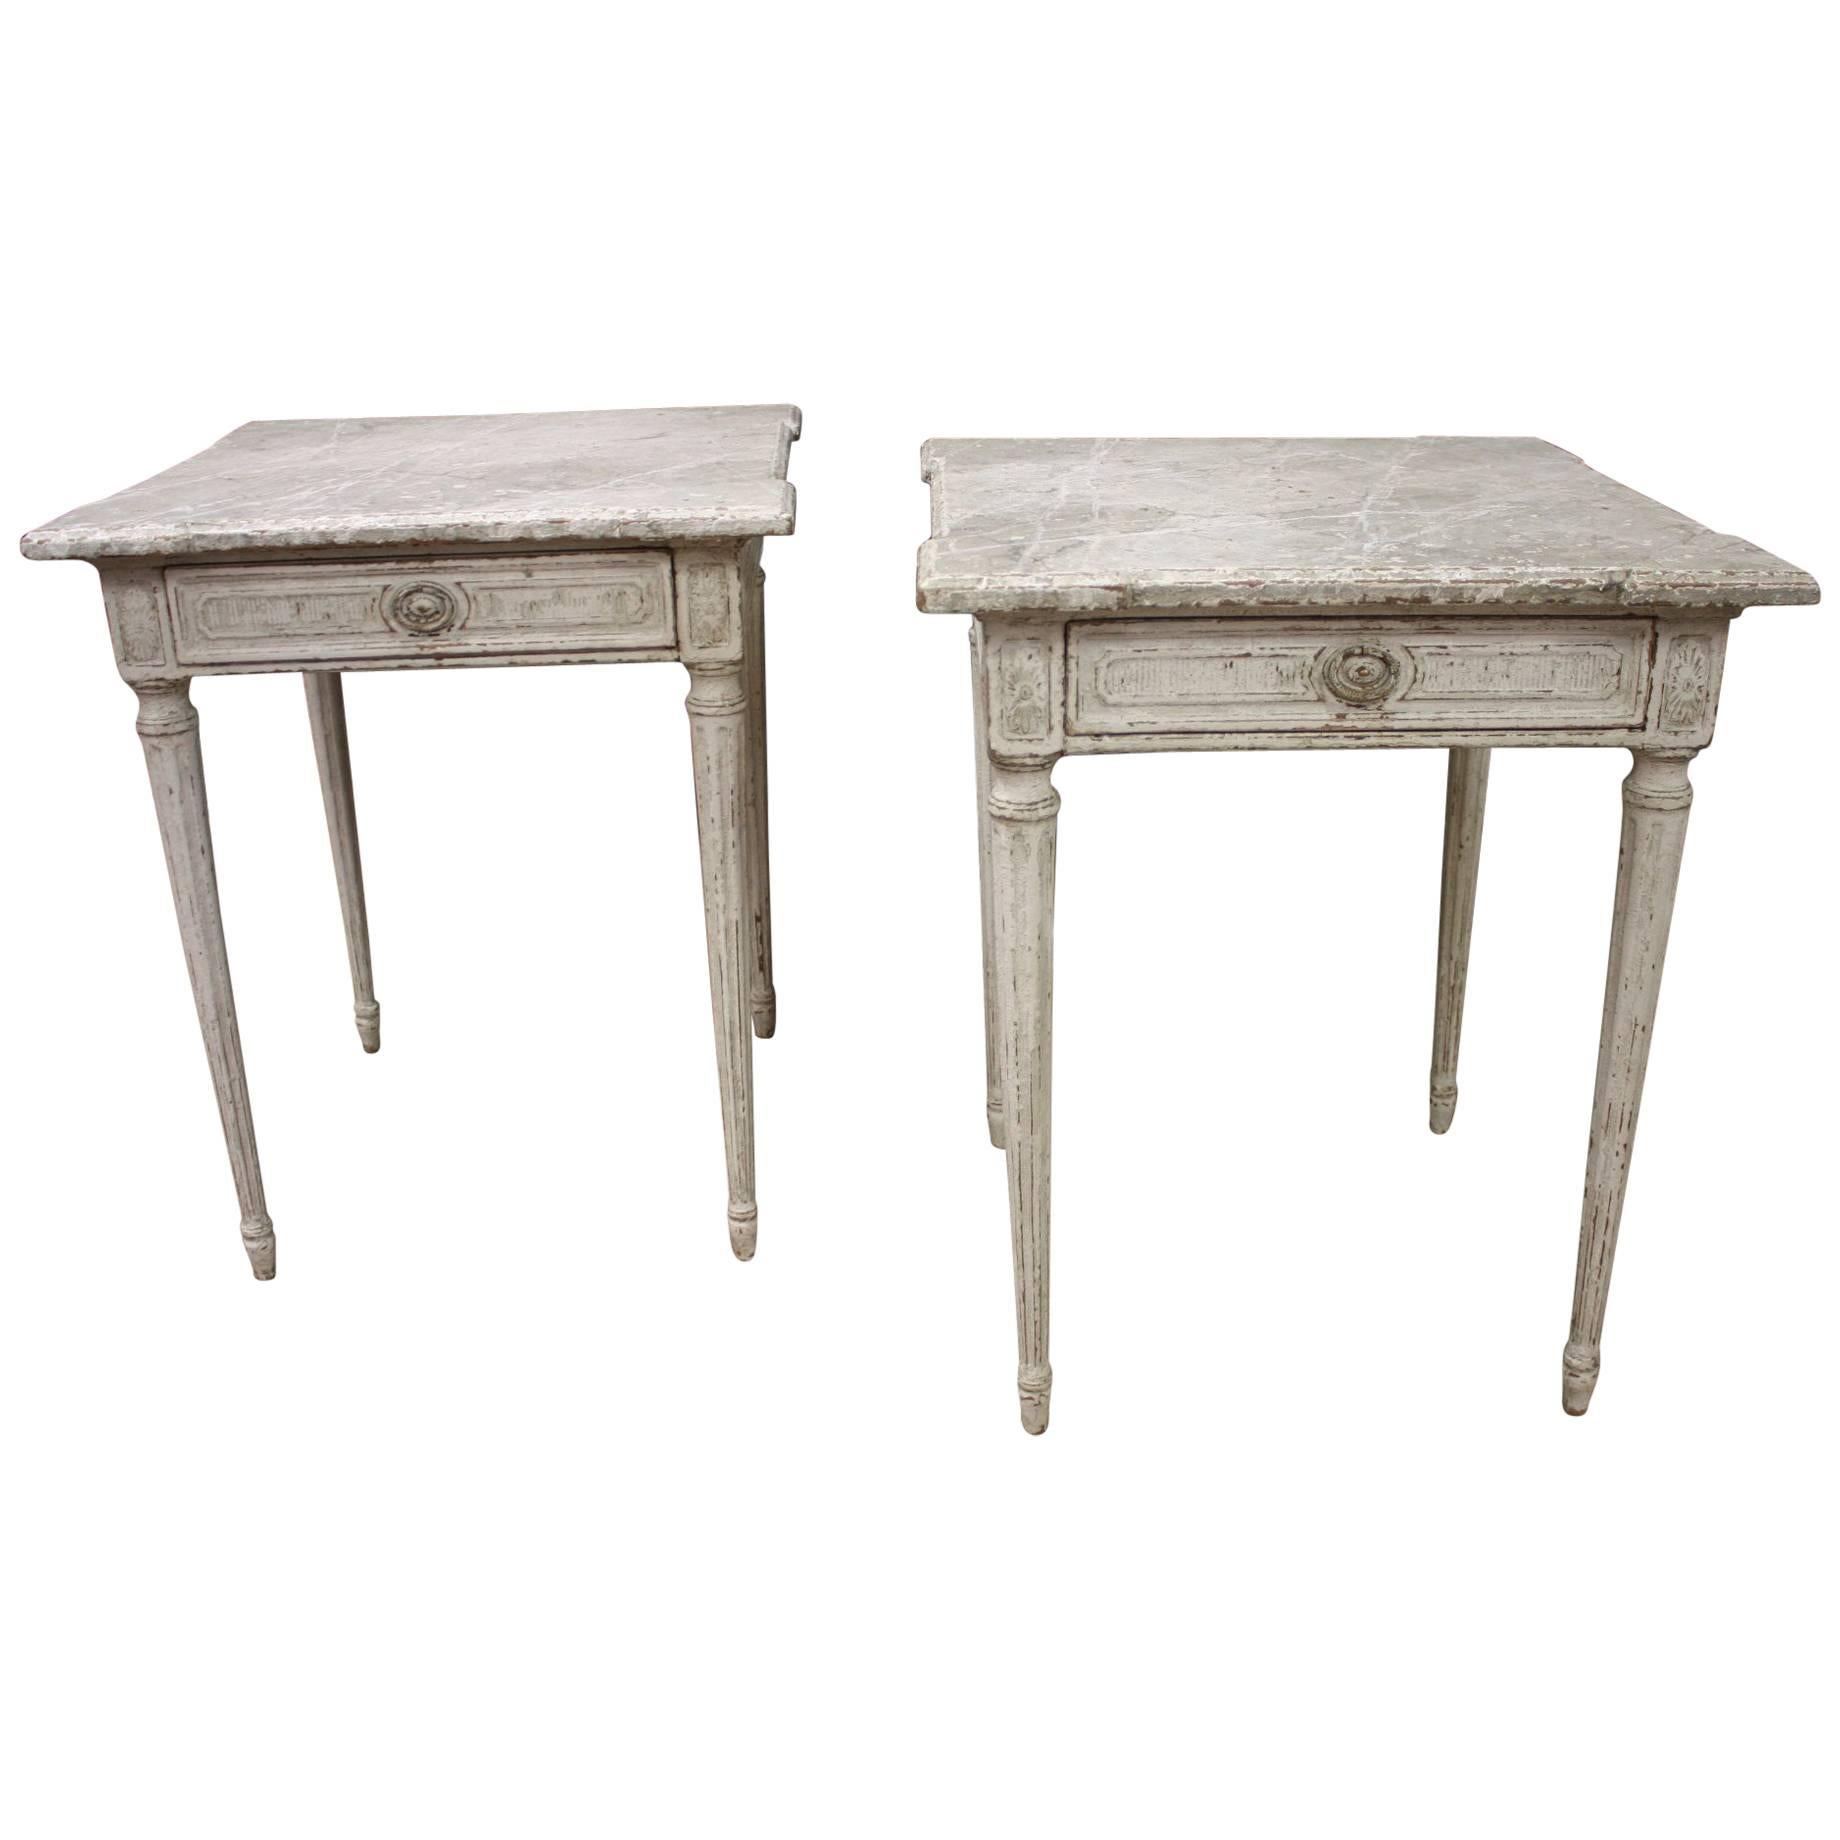 Two 19th Century French Louis XVI Carved Painted Side Table with Faux Marble Top